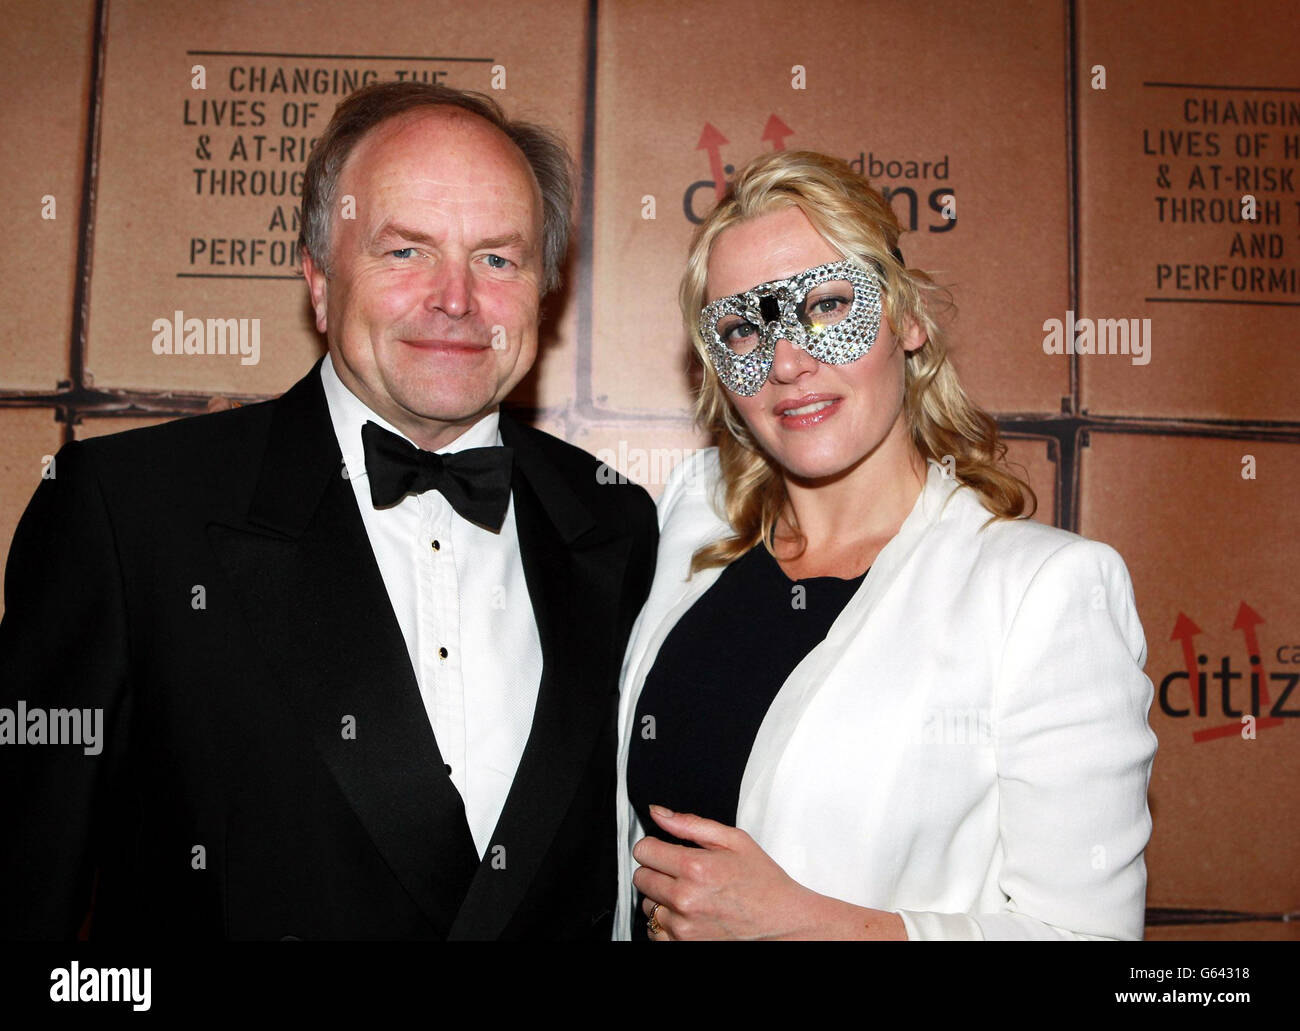 Actress Kate Winslet and Clive Anderson (left) co-host a fund raising dinner as patron of the charity Cardboard Citizens at the Drapers Hall in the City of London. Stock Photo